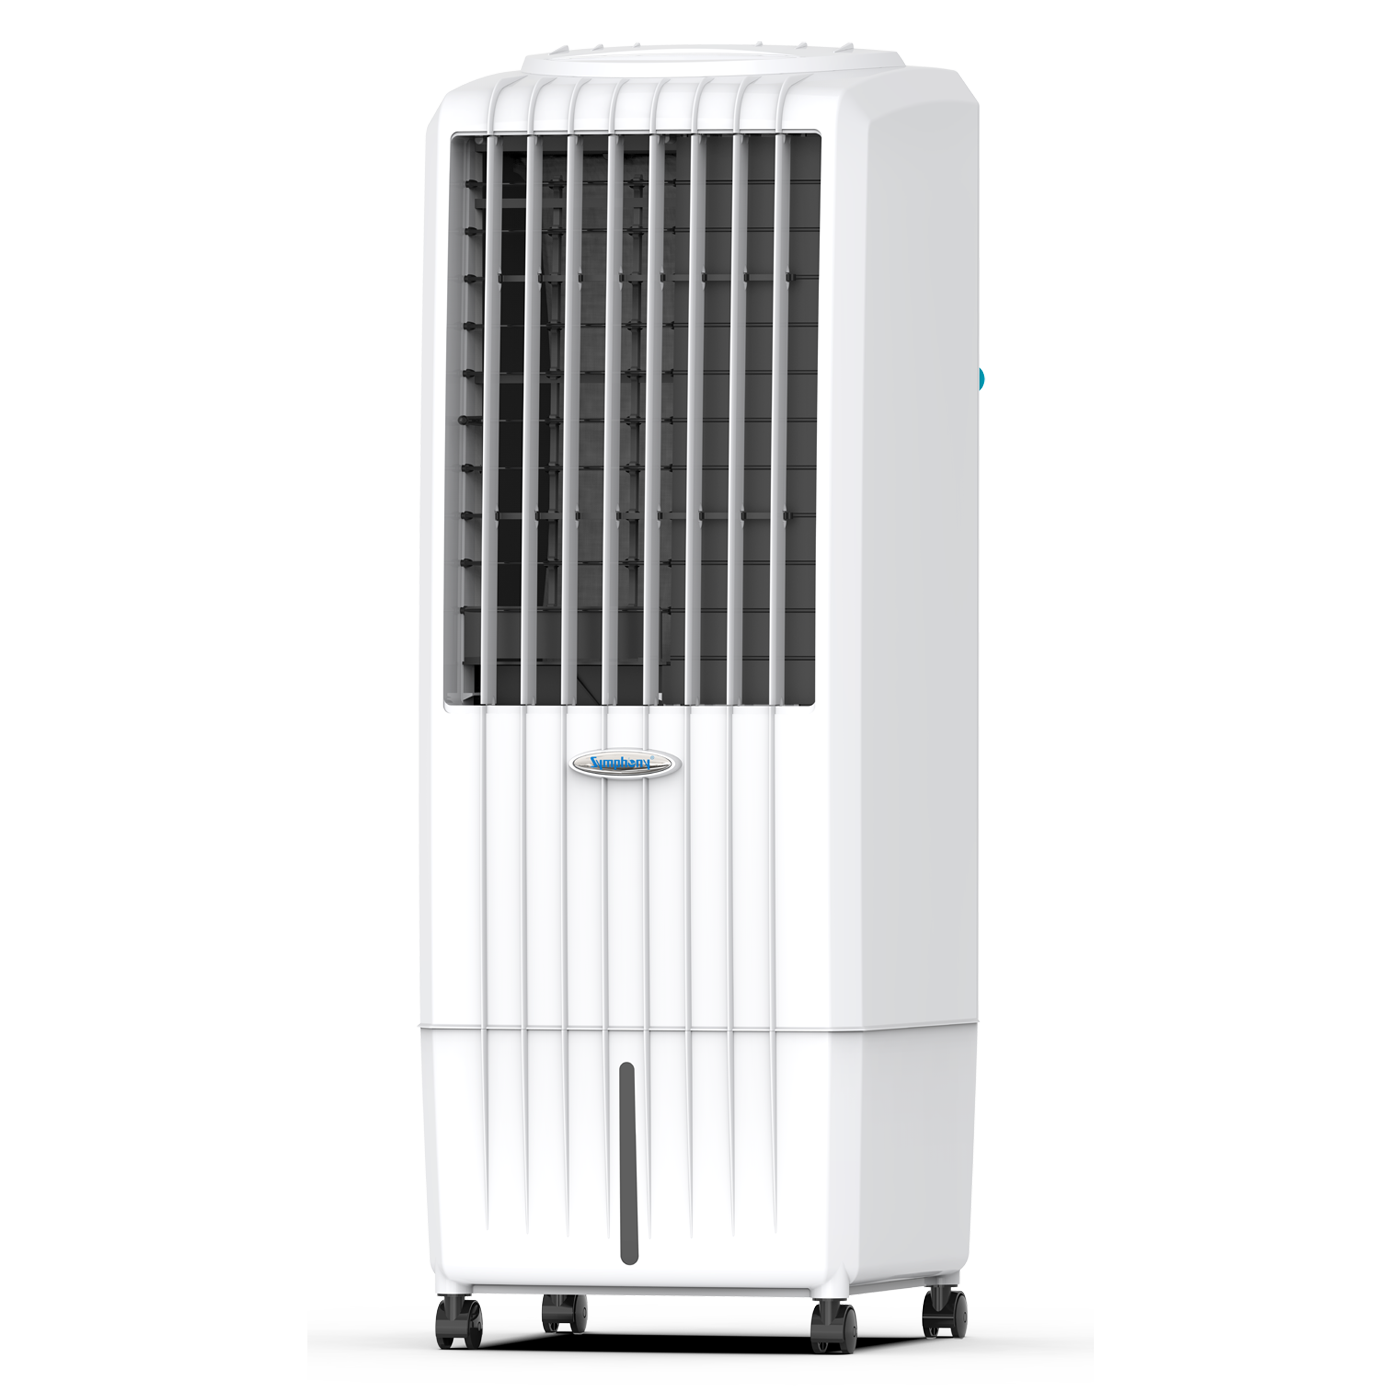 Personal Tower Air Cooler Diet 12i for Compact Rooms